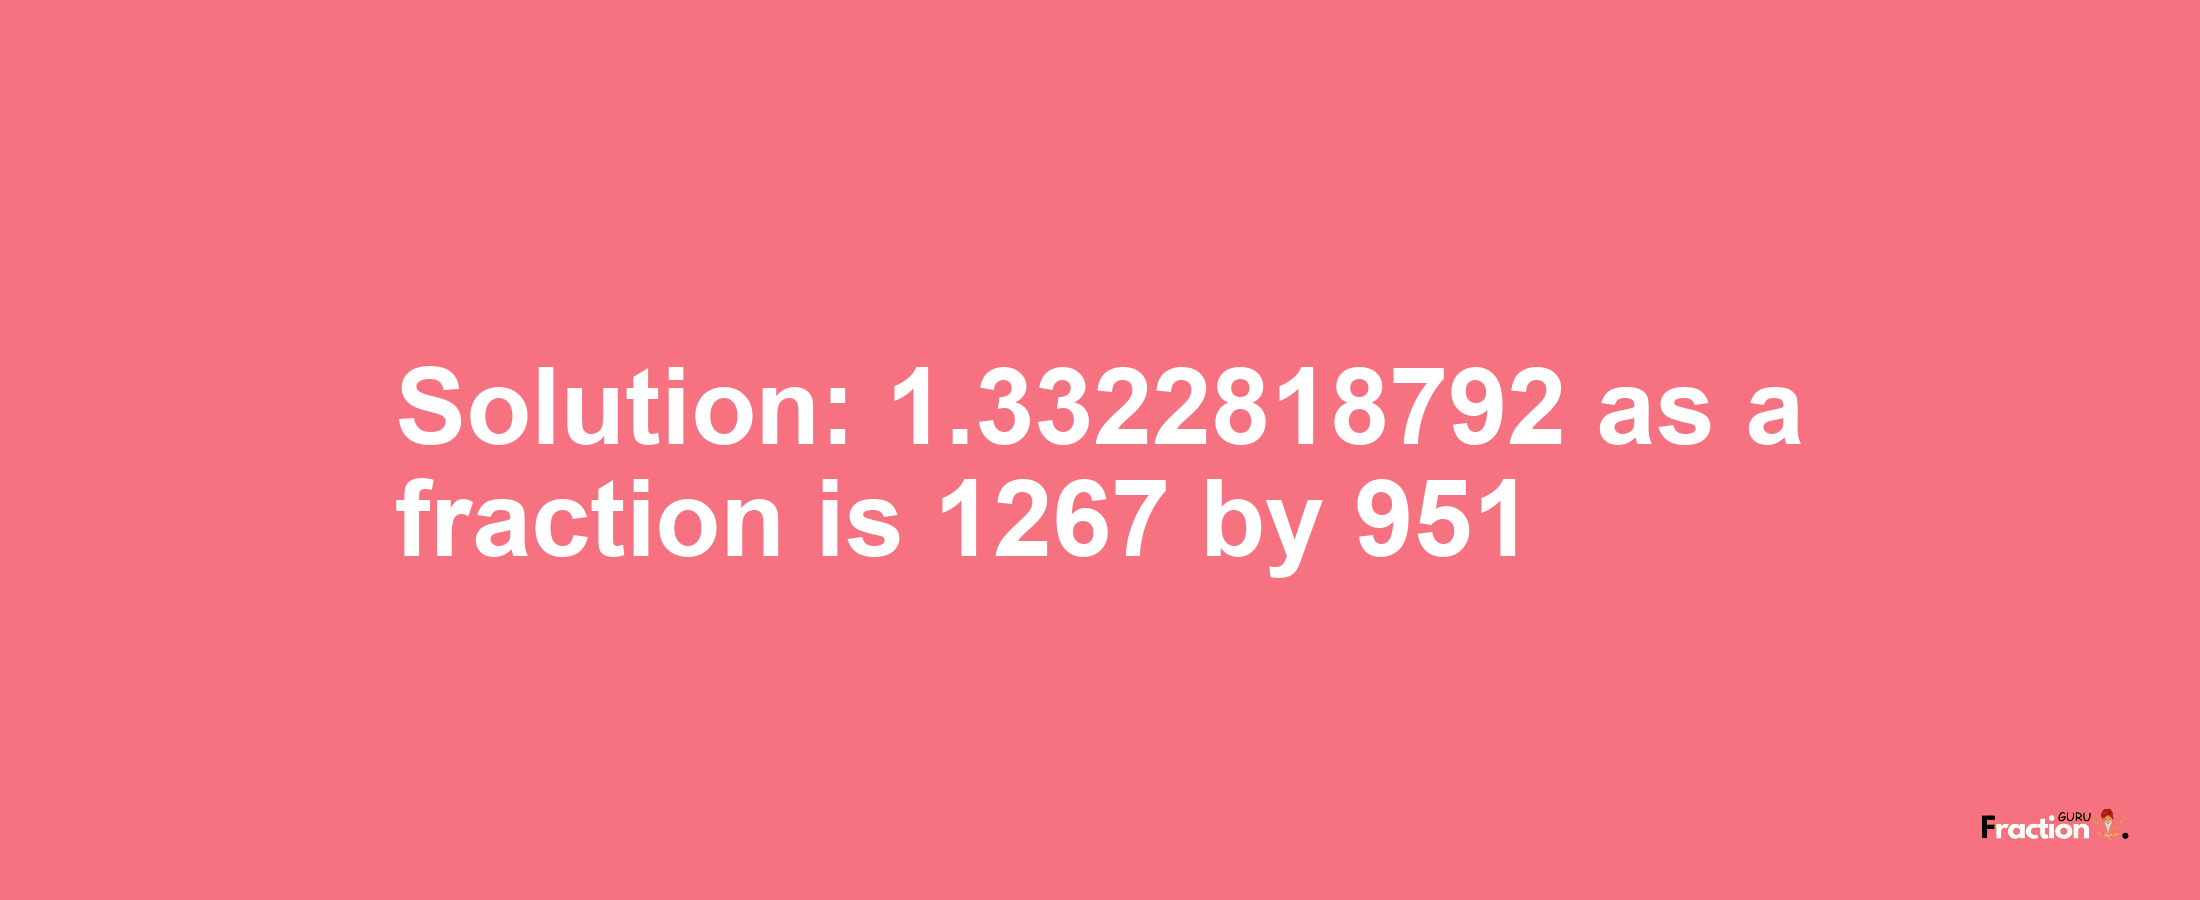 Solution:1.3322818792 as a fraction is 1267/951